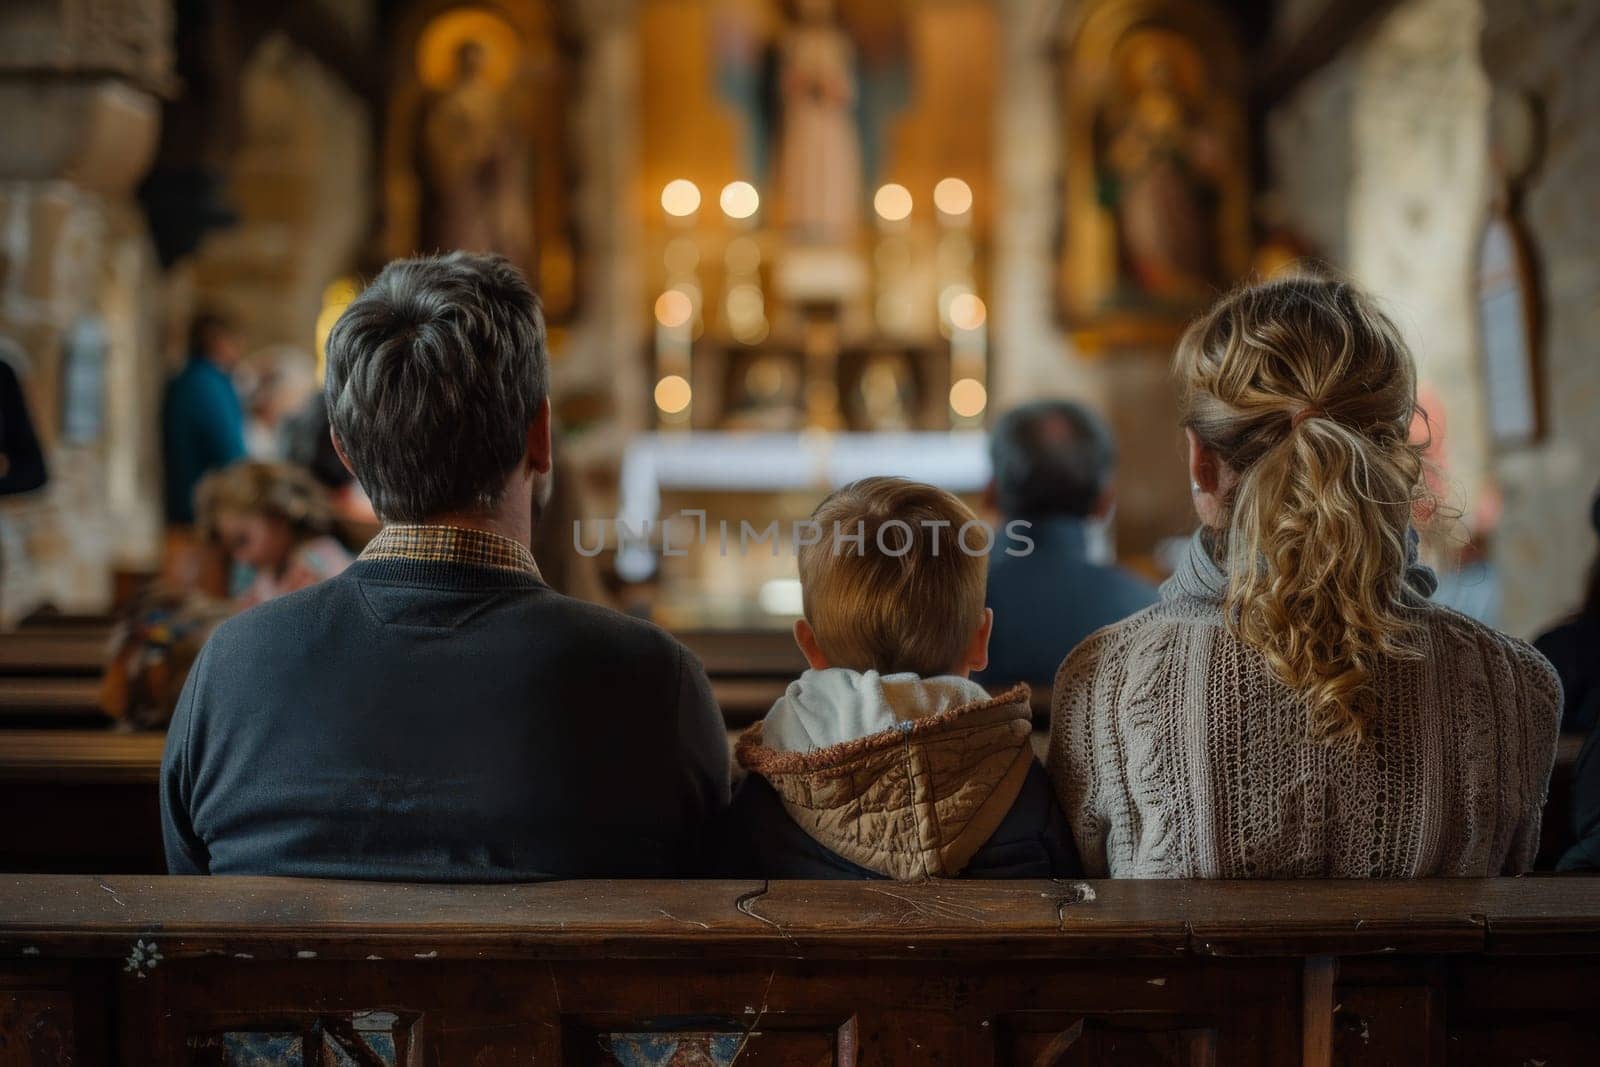 A family of three sits in a church pew. The woman is wearing a floral dress and the man is wearing a white shirt